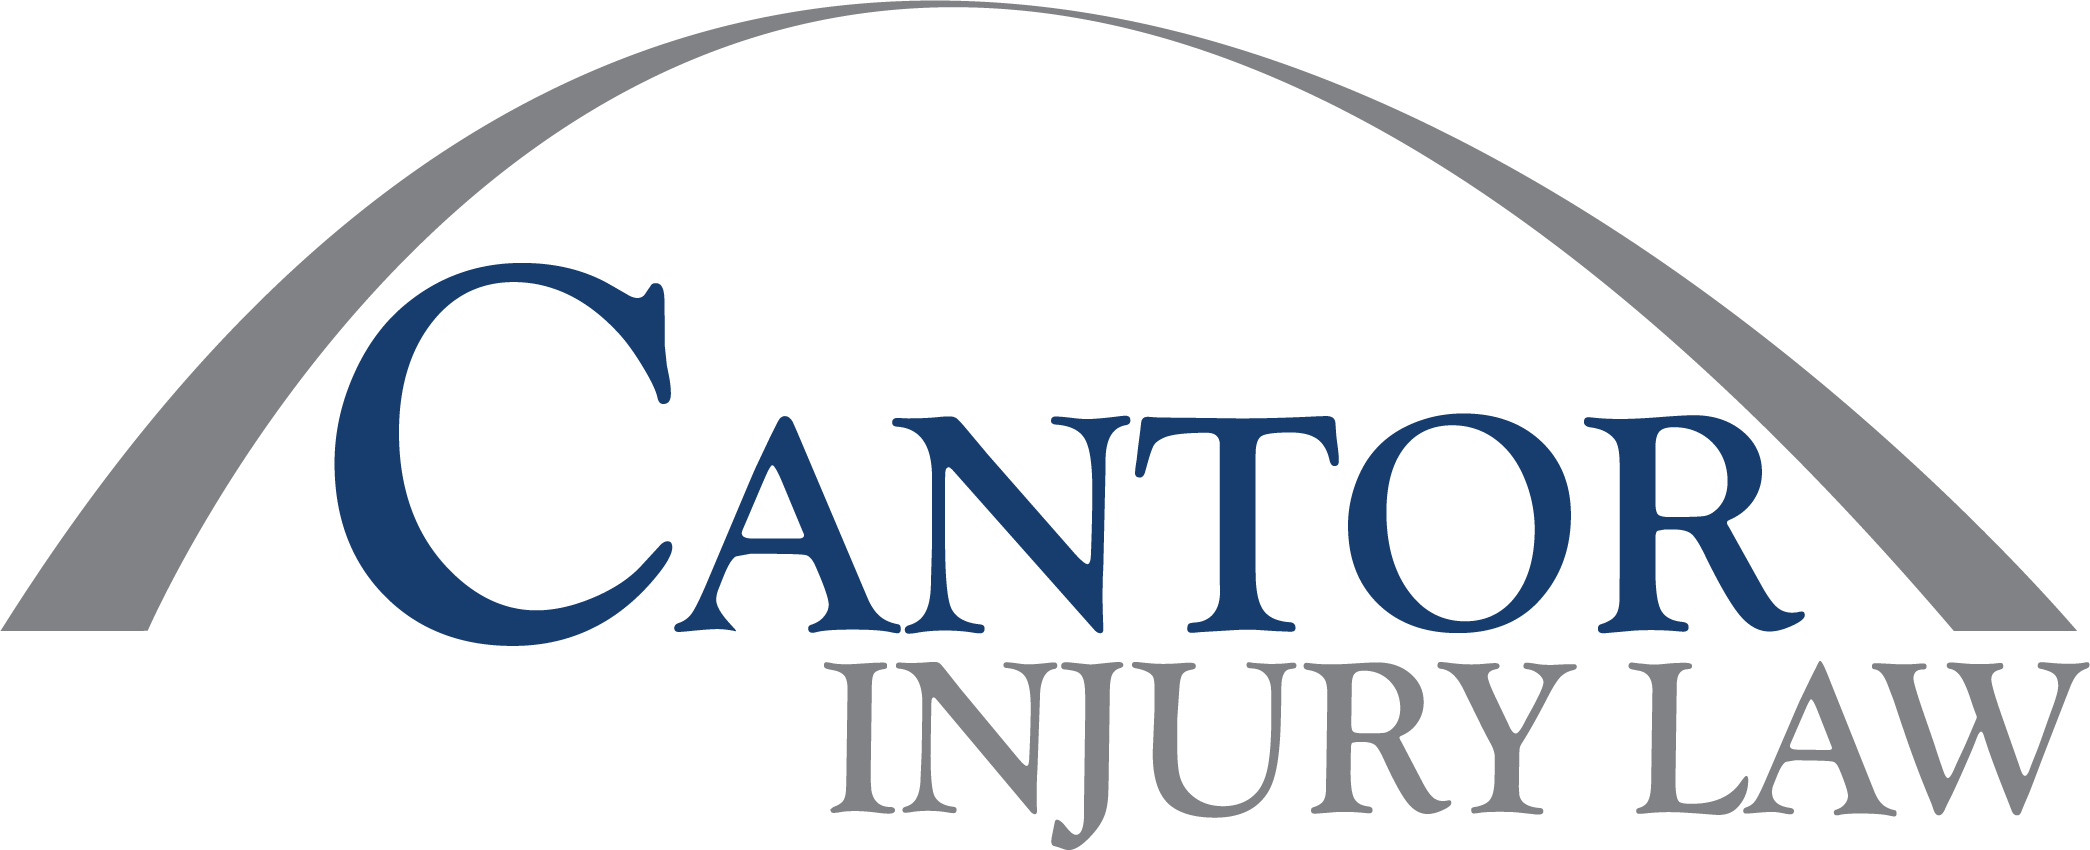 Cantor Injury Law law firm logo